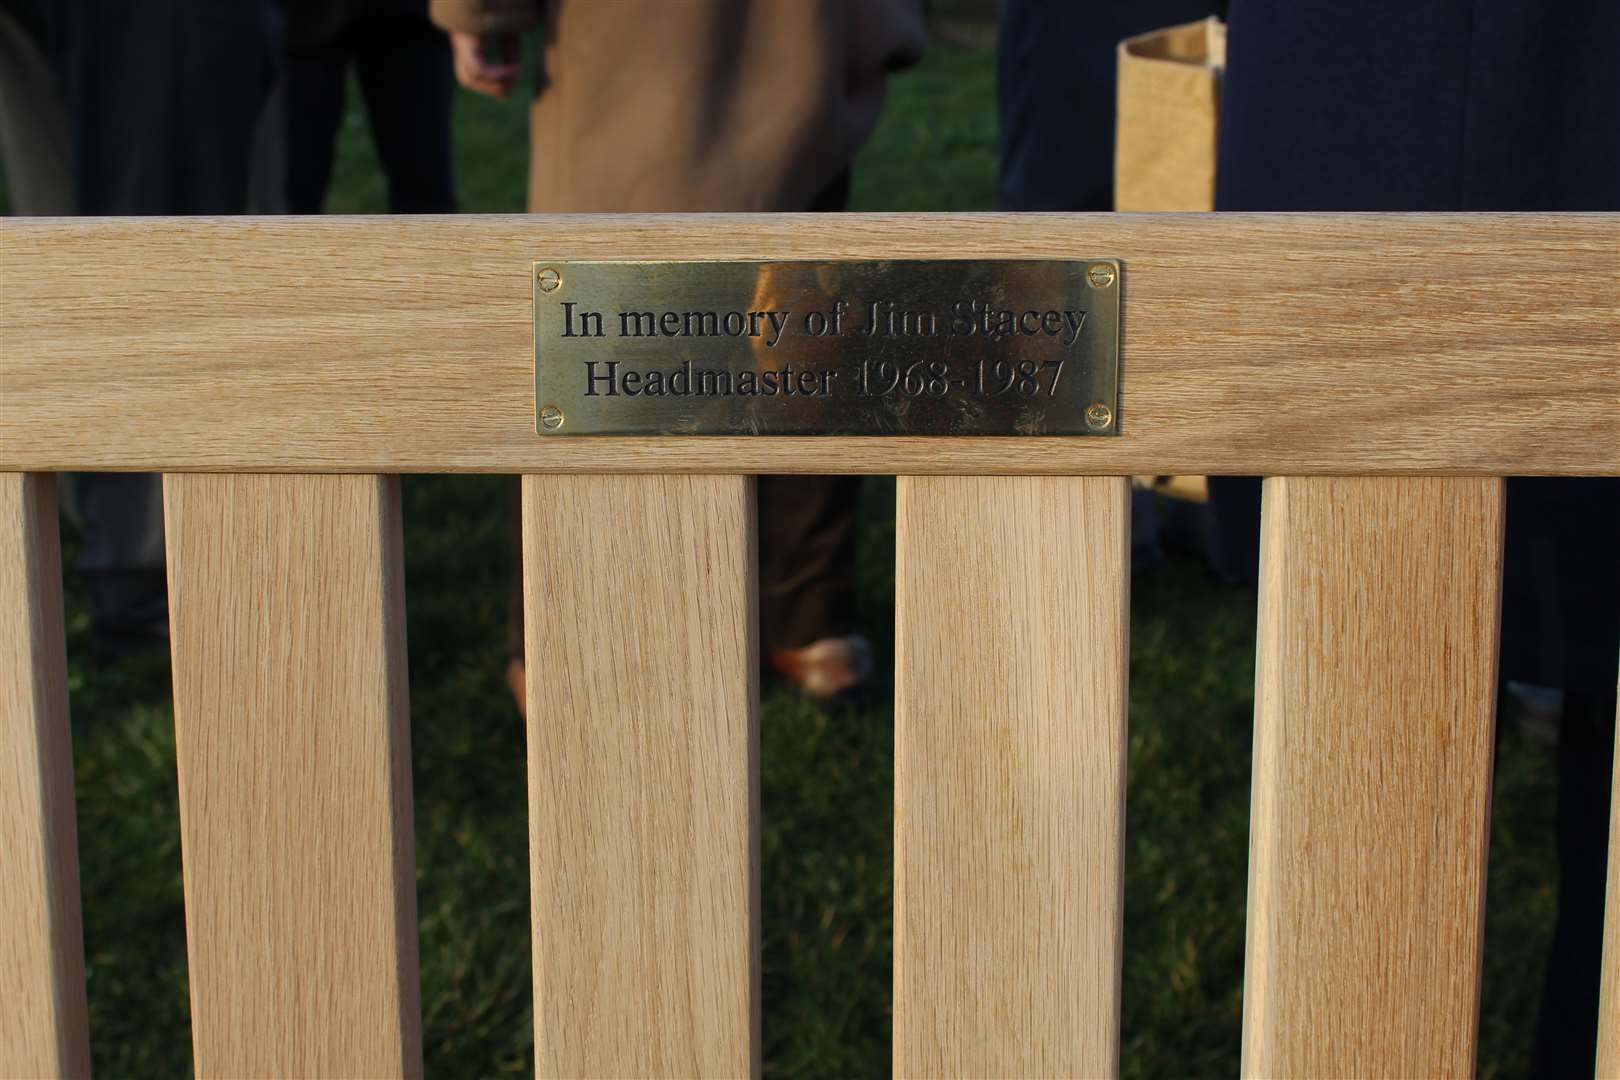 The bench in memory of former Deal Secondary School head teacher Jim Stacey has been placed at Goodwin Academy